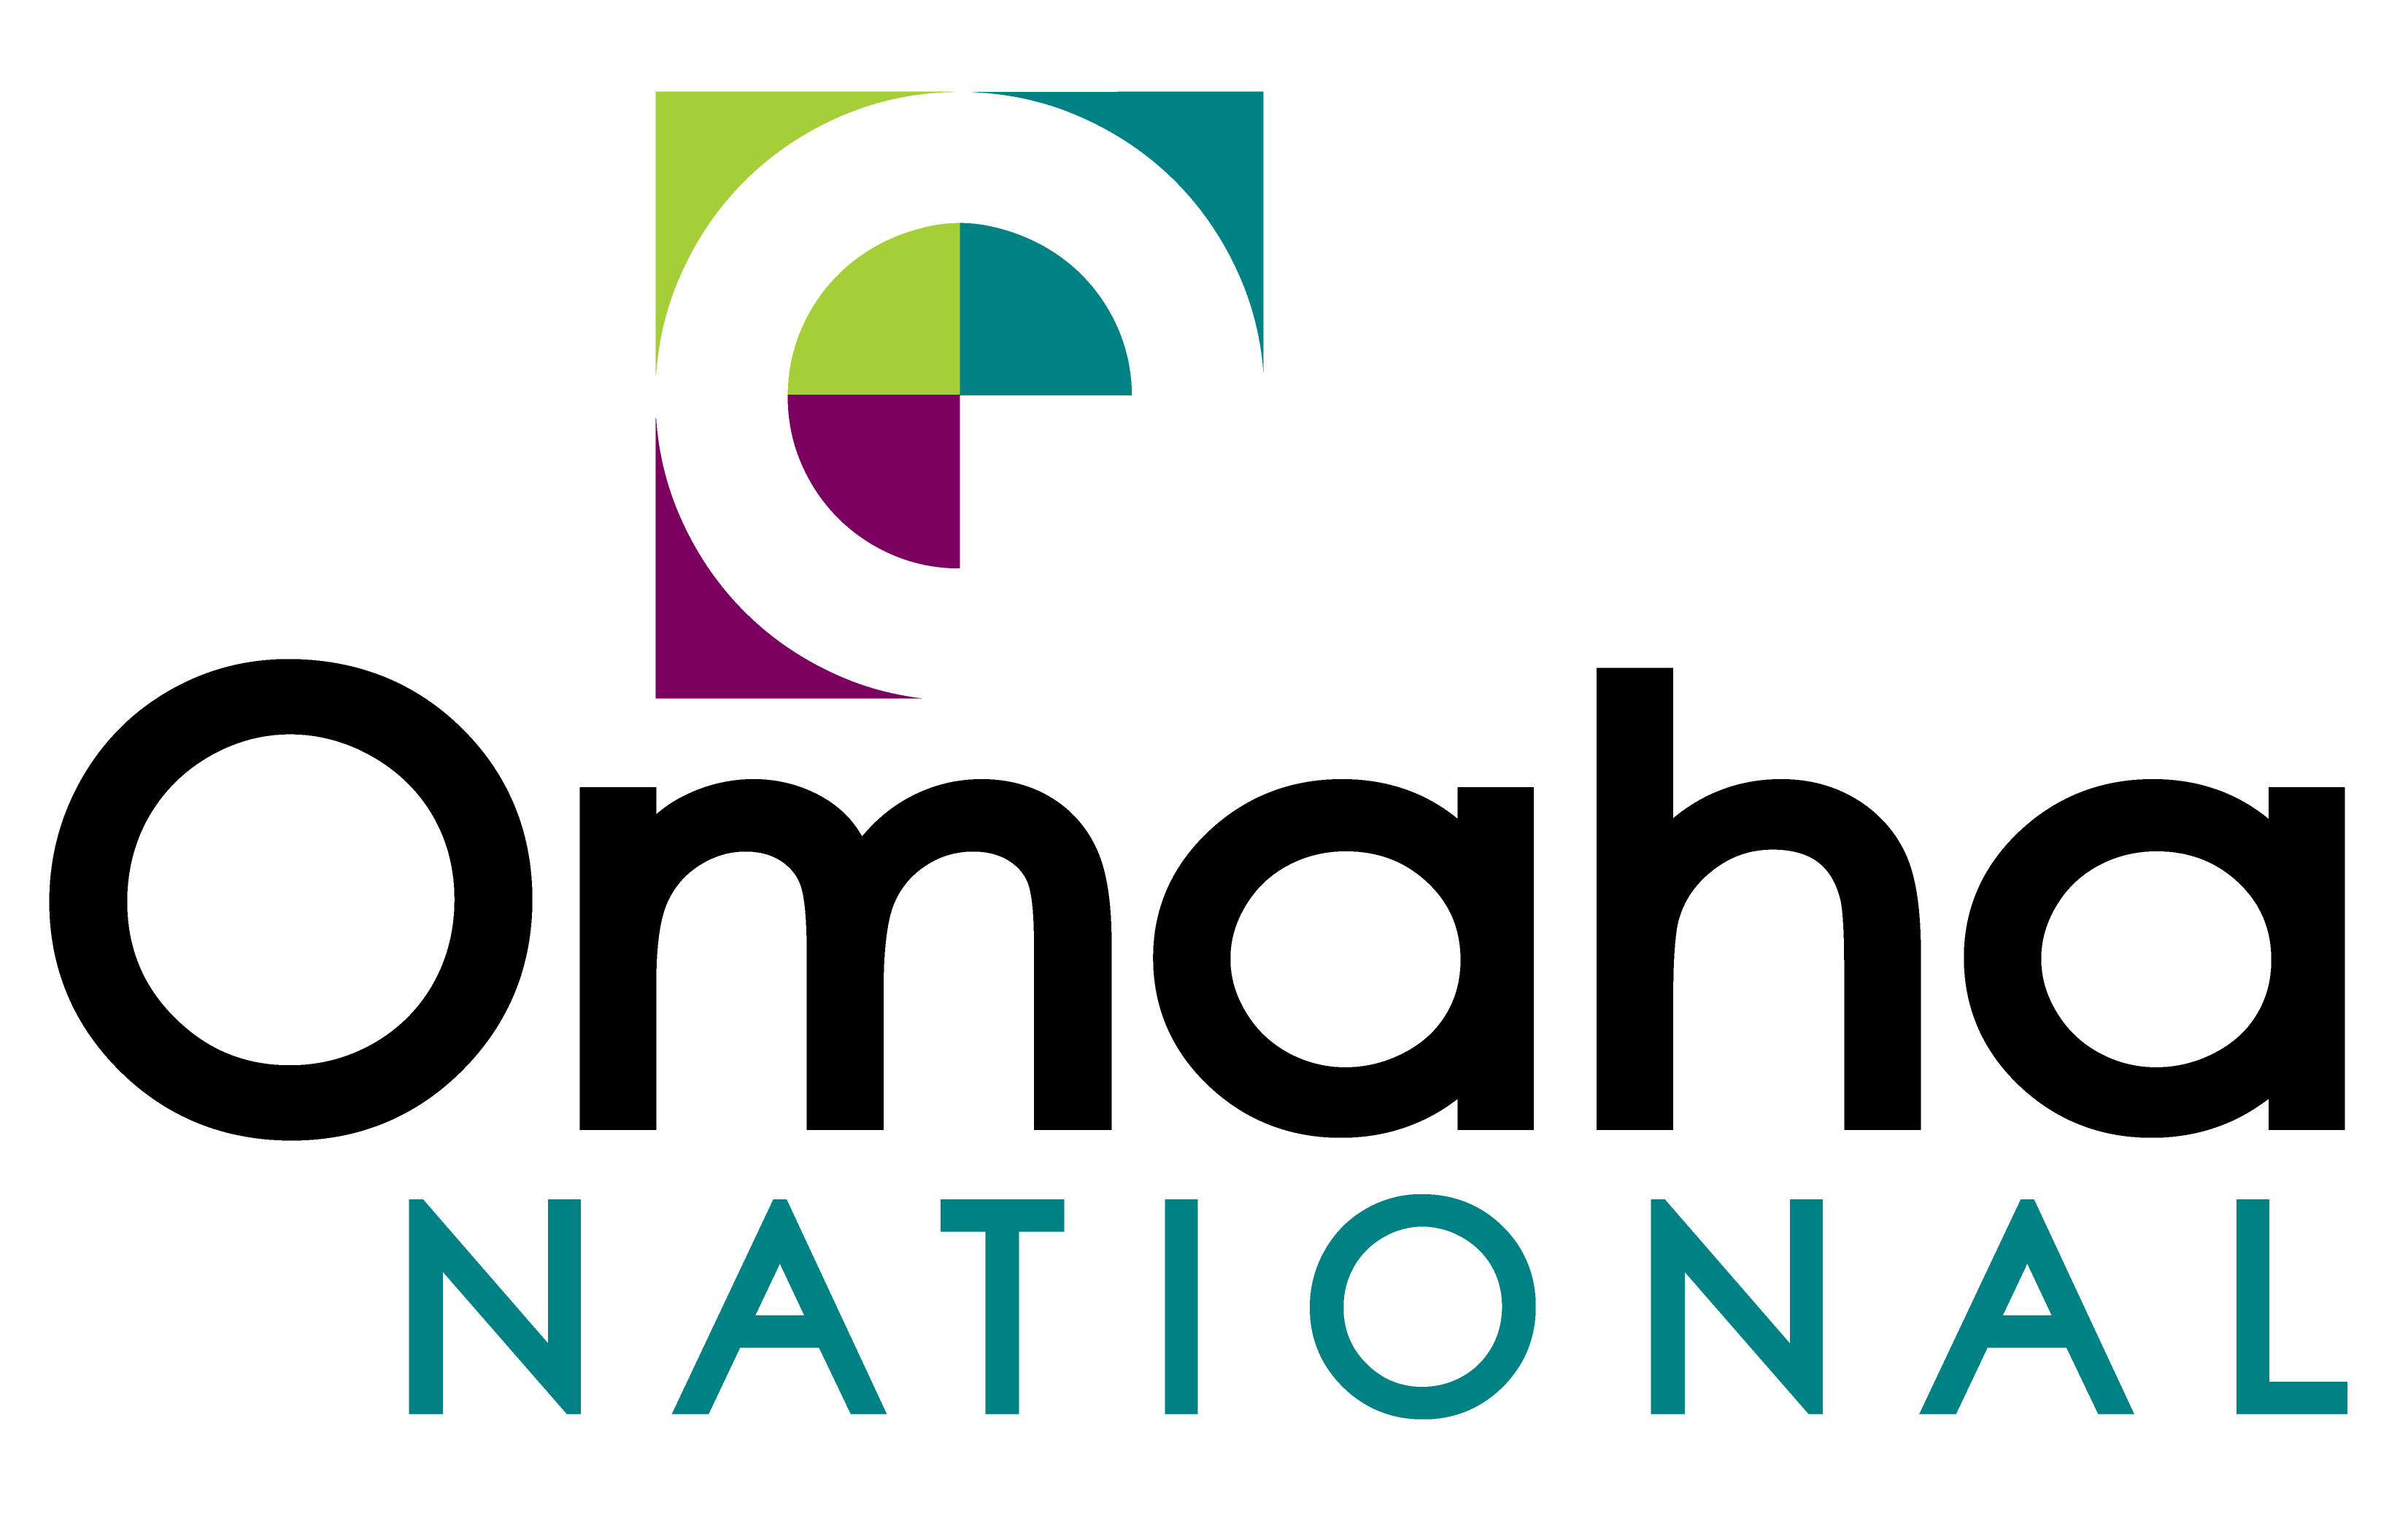 Download Federated National Insurance Logo PNG Image with No Background -  PNGkey.com